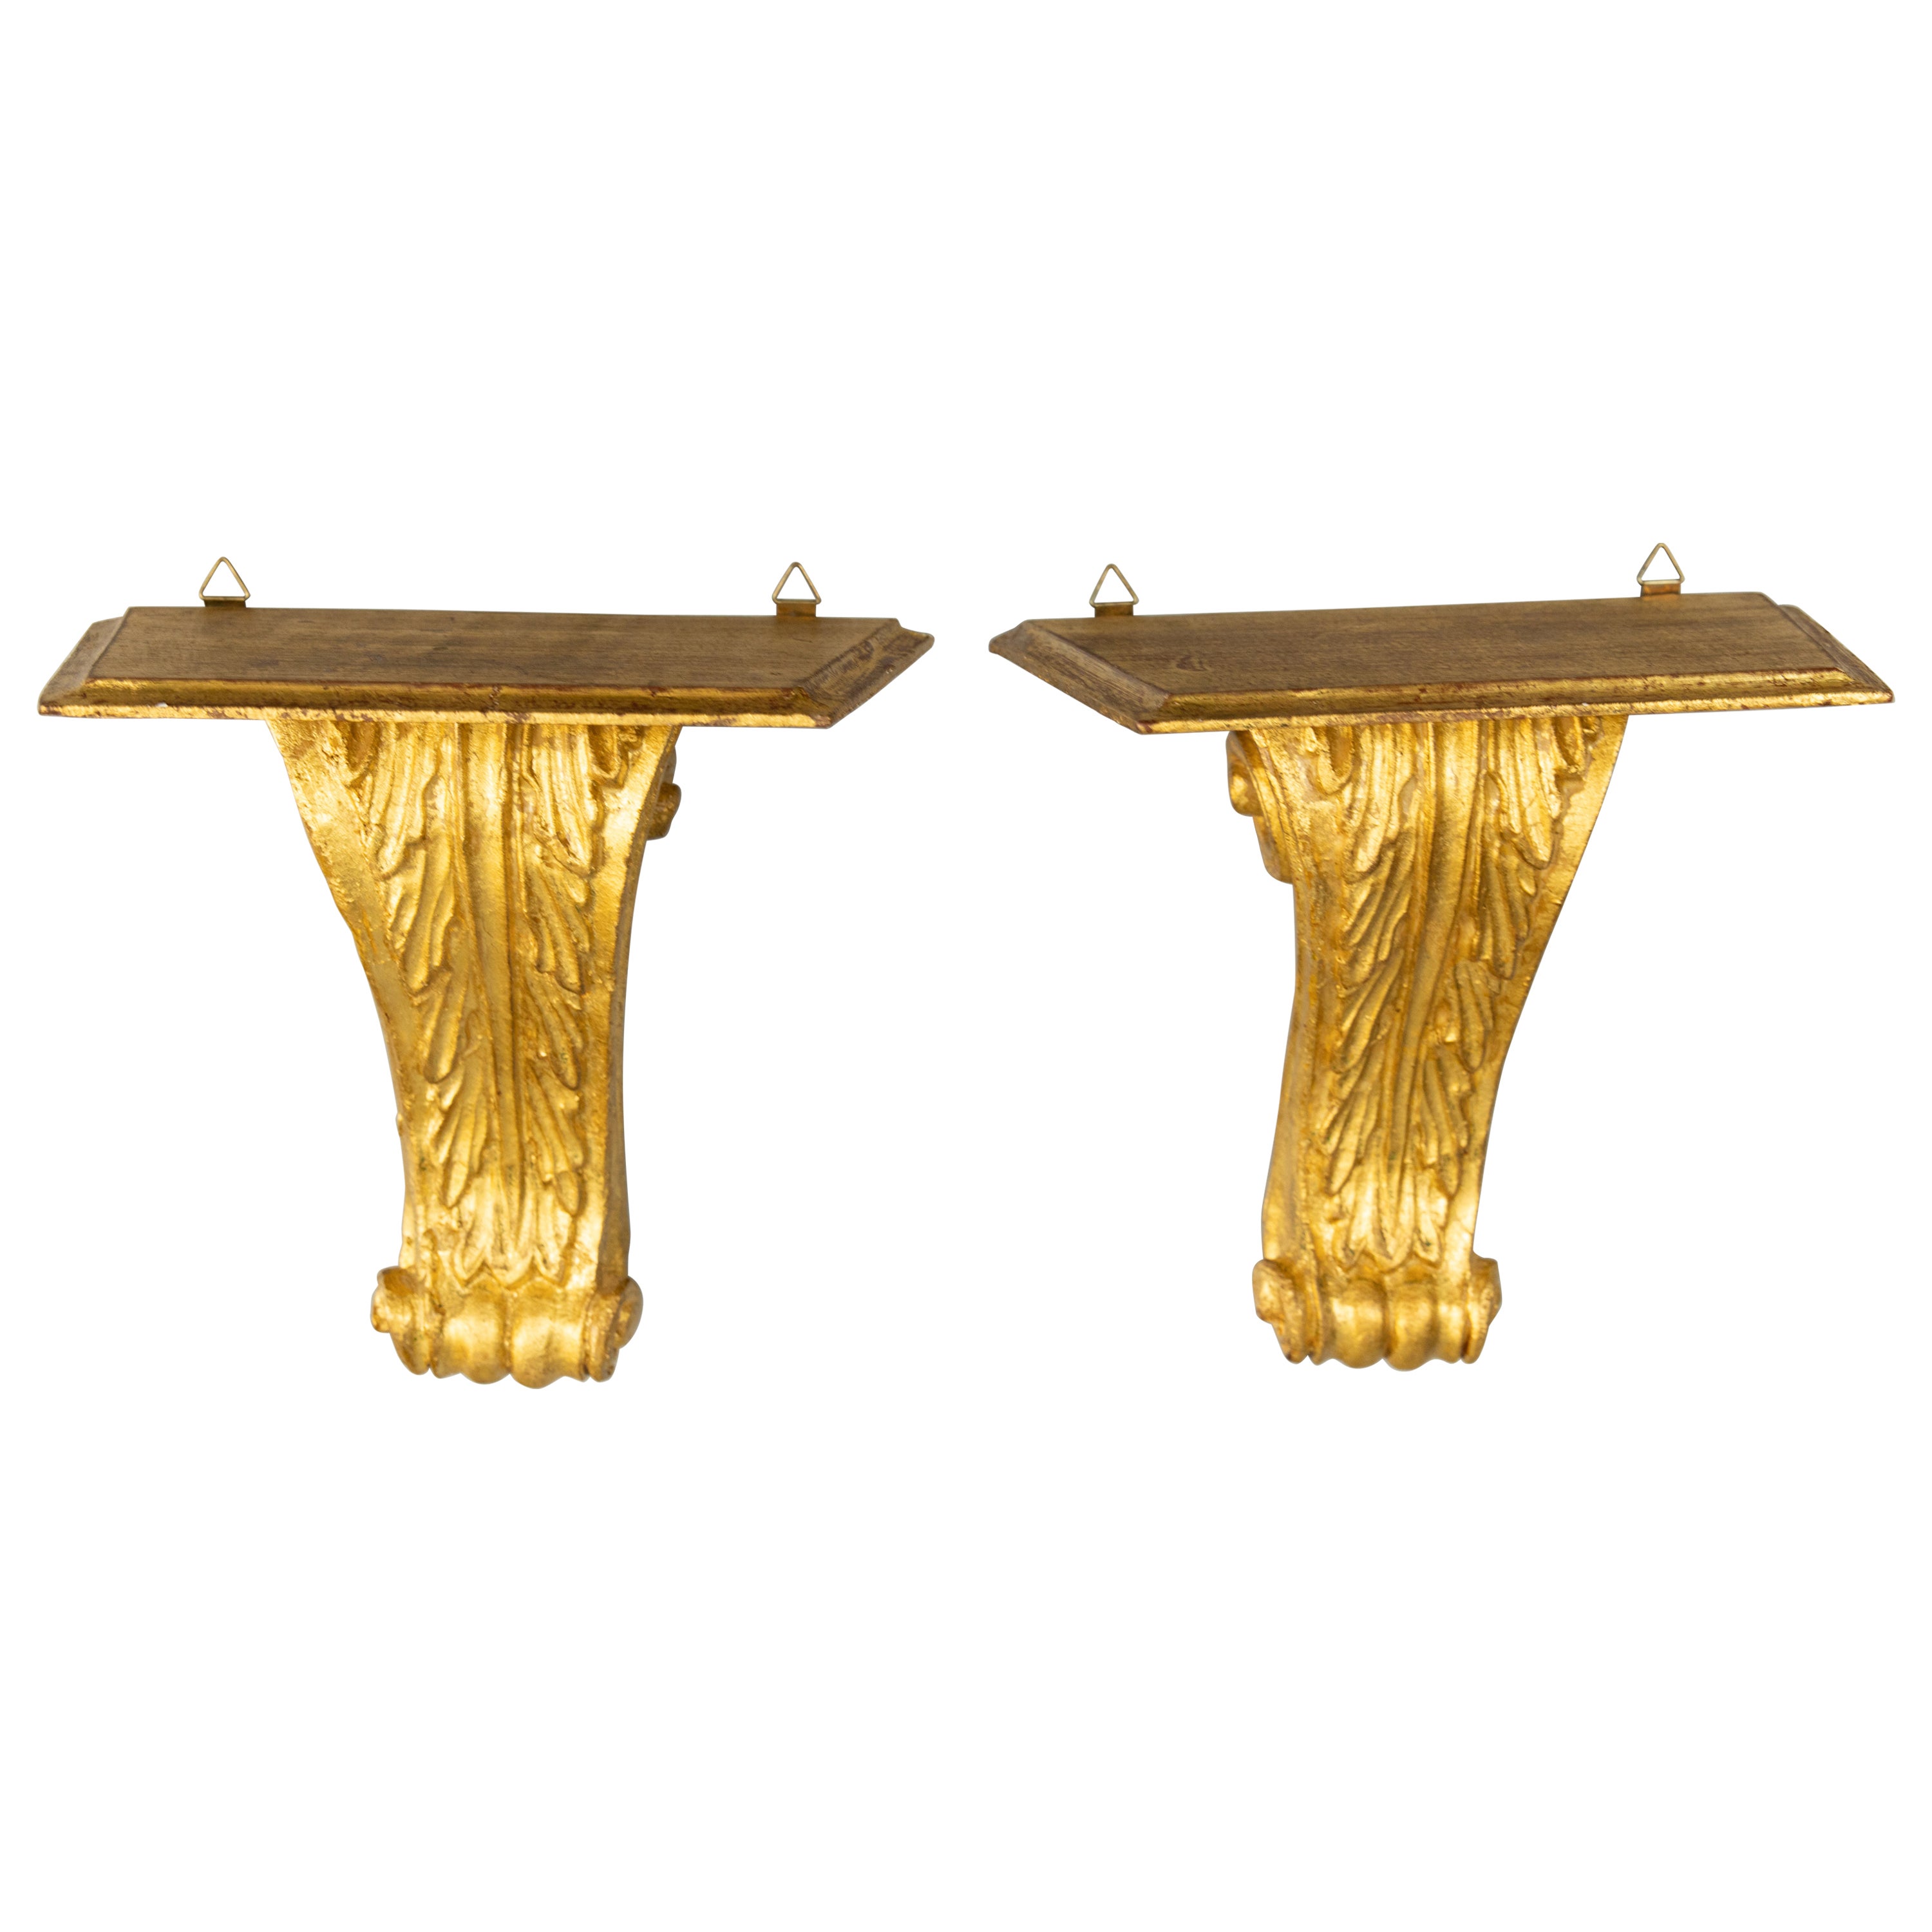 Pair of Mid-20th Century Italian Carved Giltwood Wall Brackets Shelves For Sale